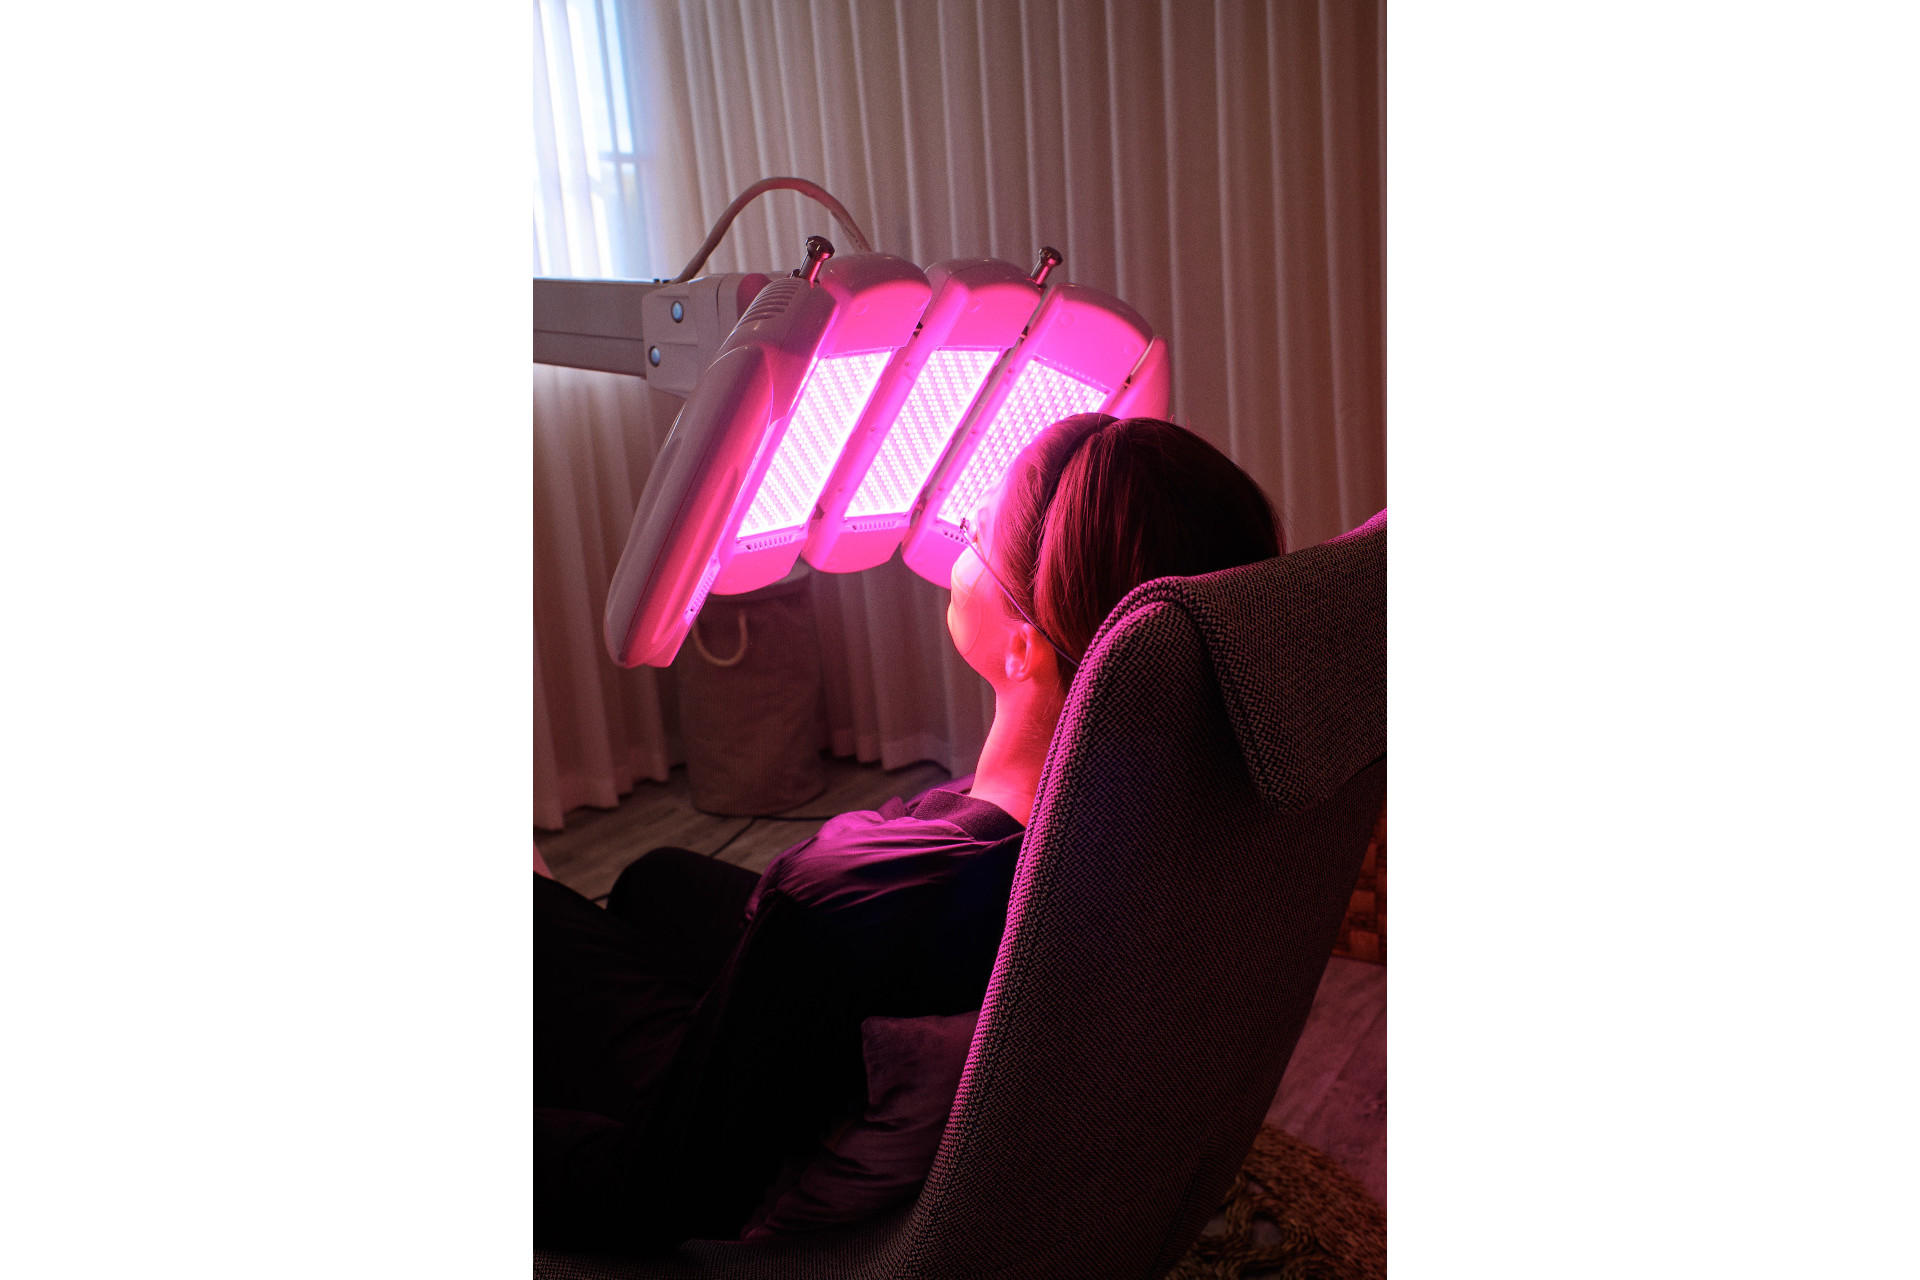 Woman sat in chair receiving LED treatment from pink light